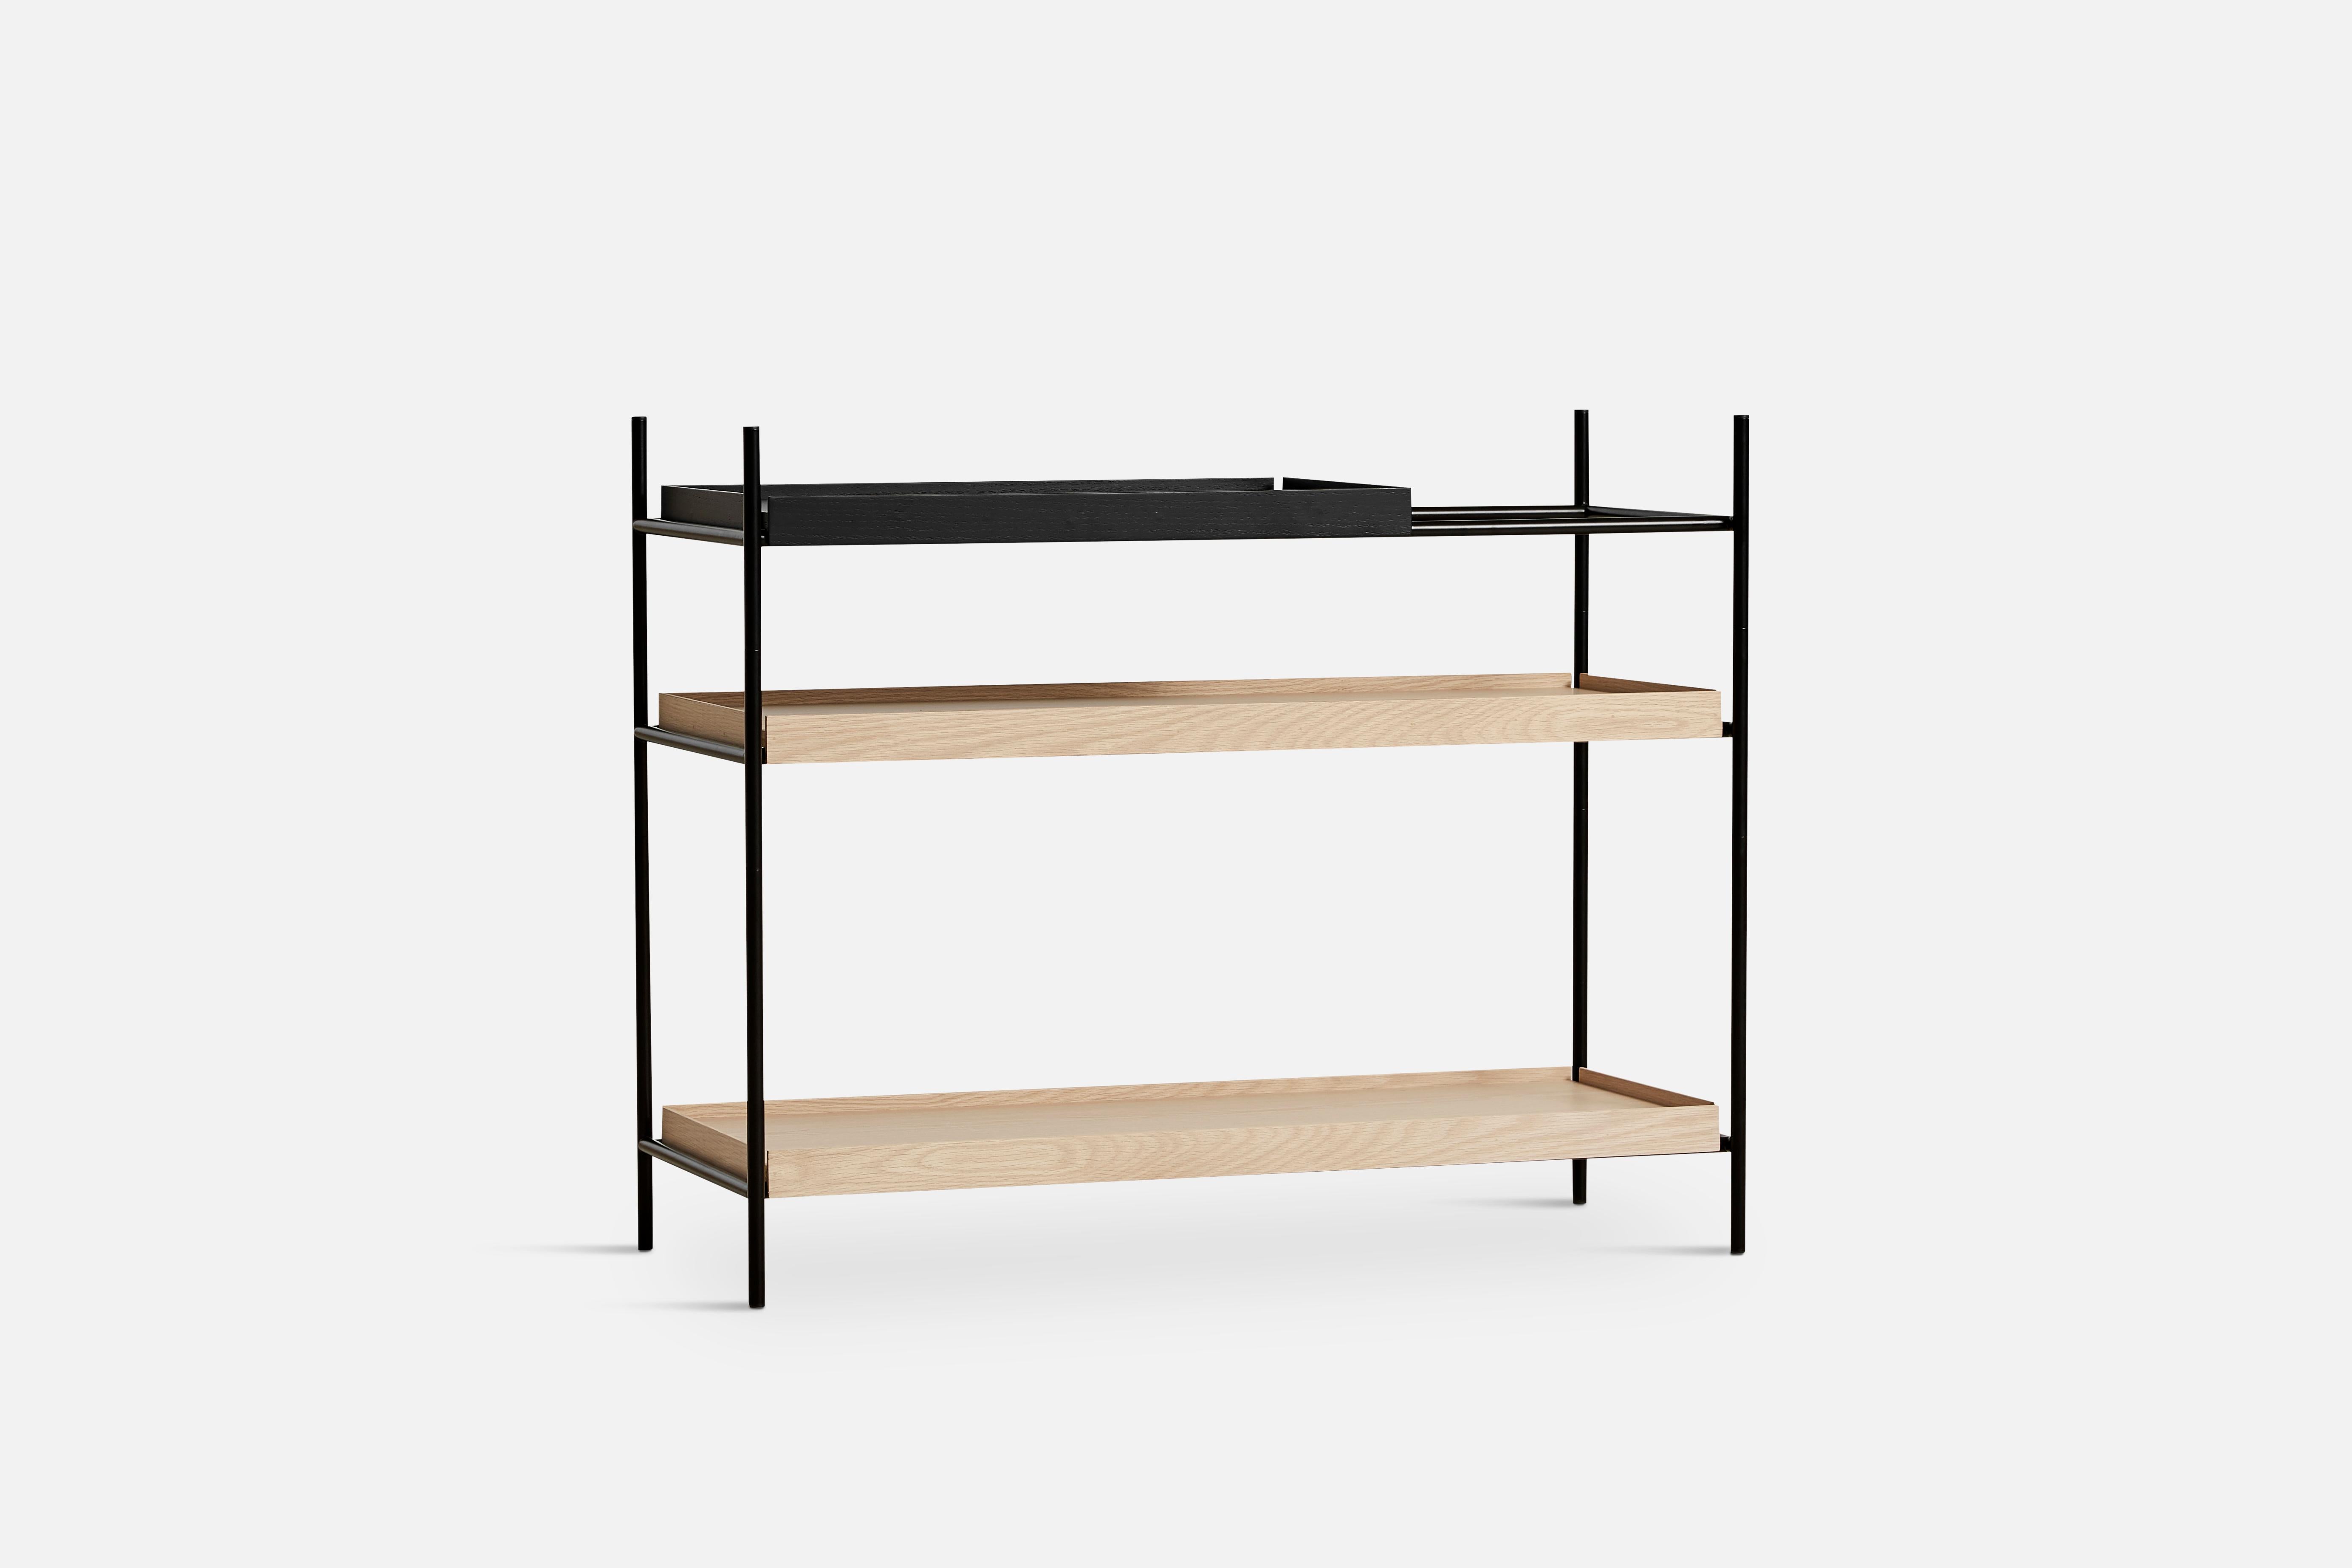 Low oak and black tray shelf I by Hanne Willmann
Materials: metal, oak.
Dimensions: D 40 x W 100 x H 81 cm
Also available in different tray conbinations and 2 sizes: H81, H 201 cm.

Hanne Willmann is a dynamic German designer with her own